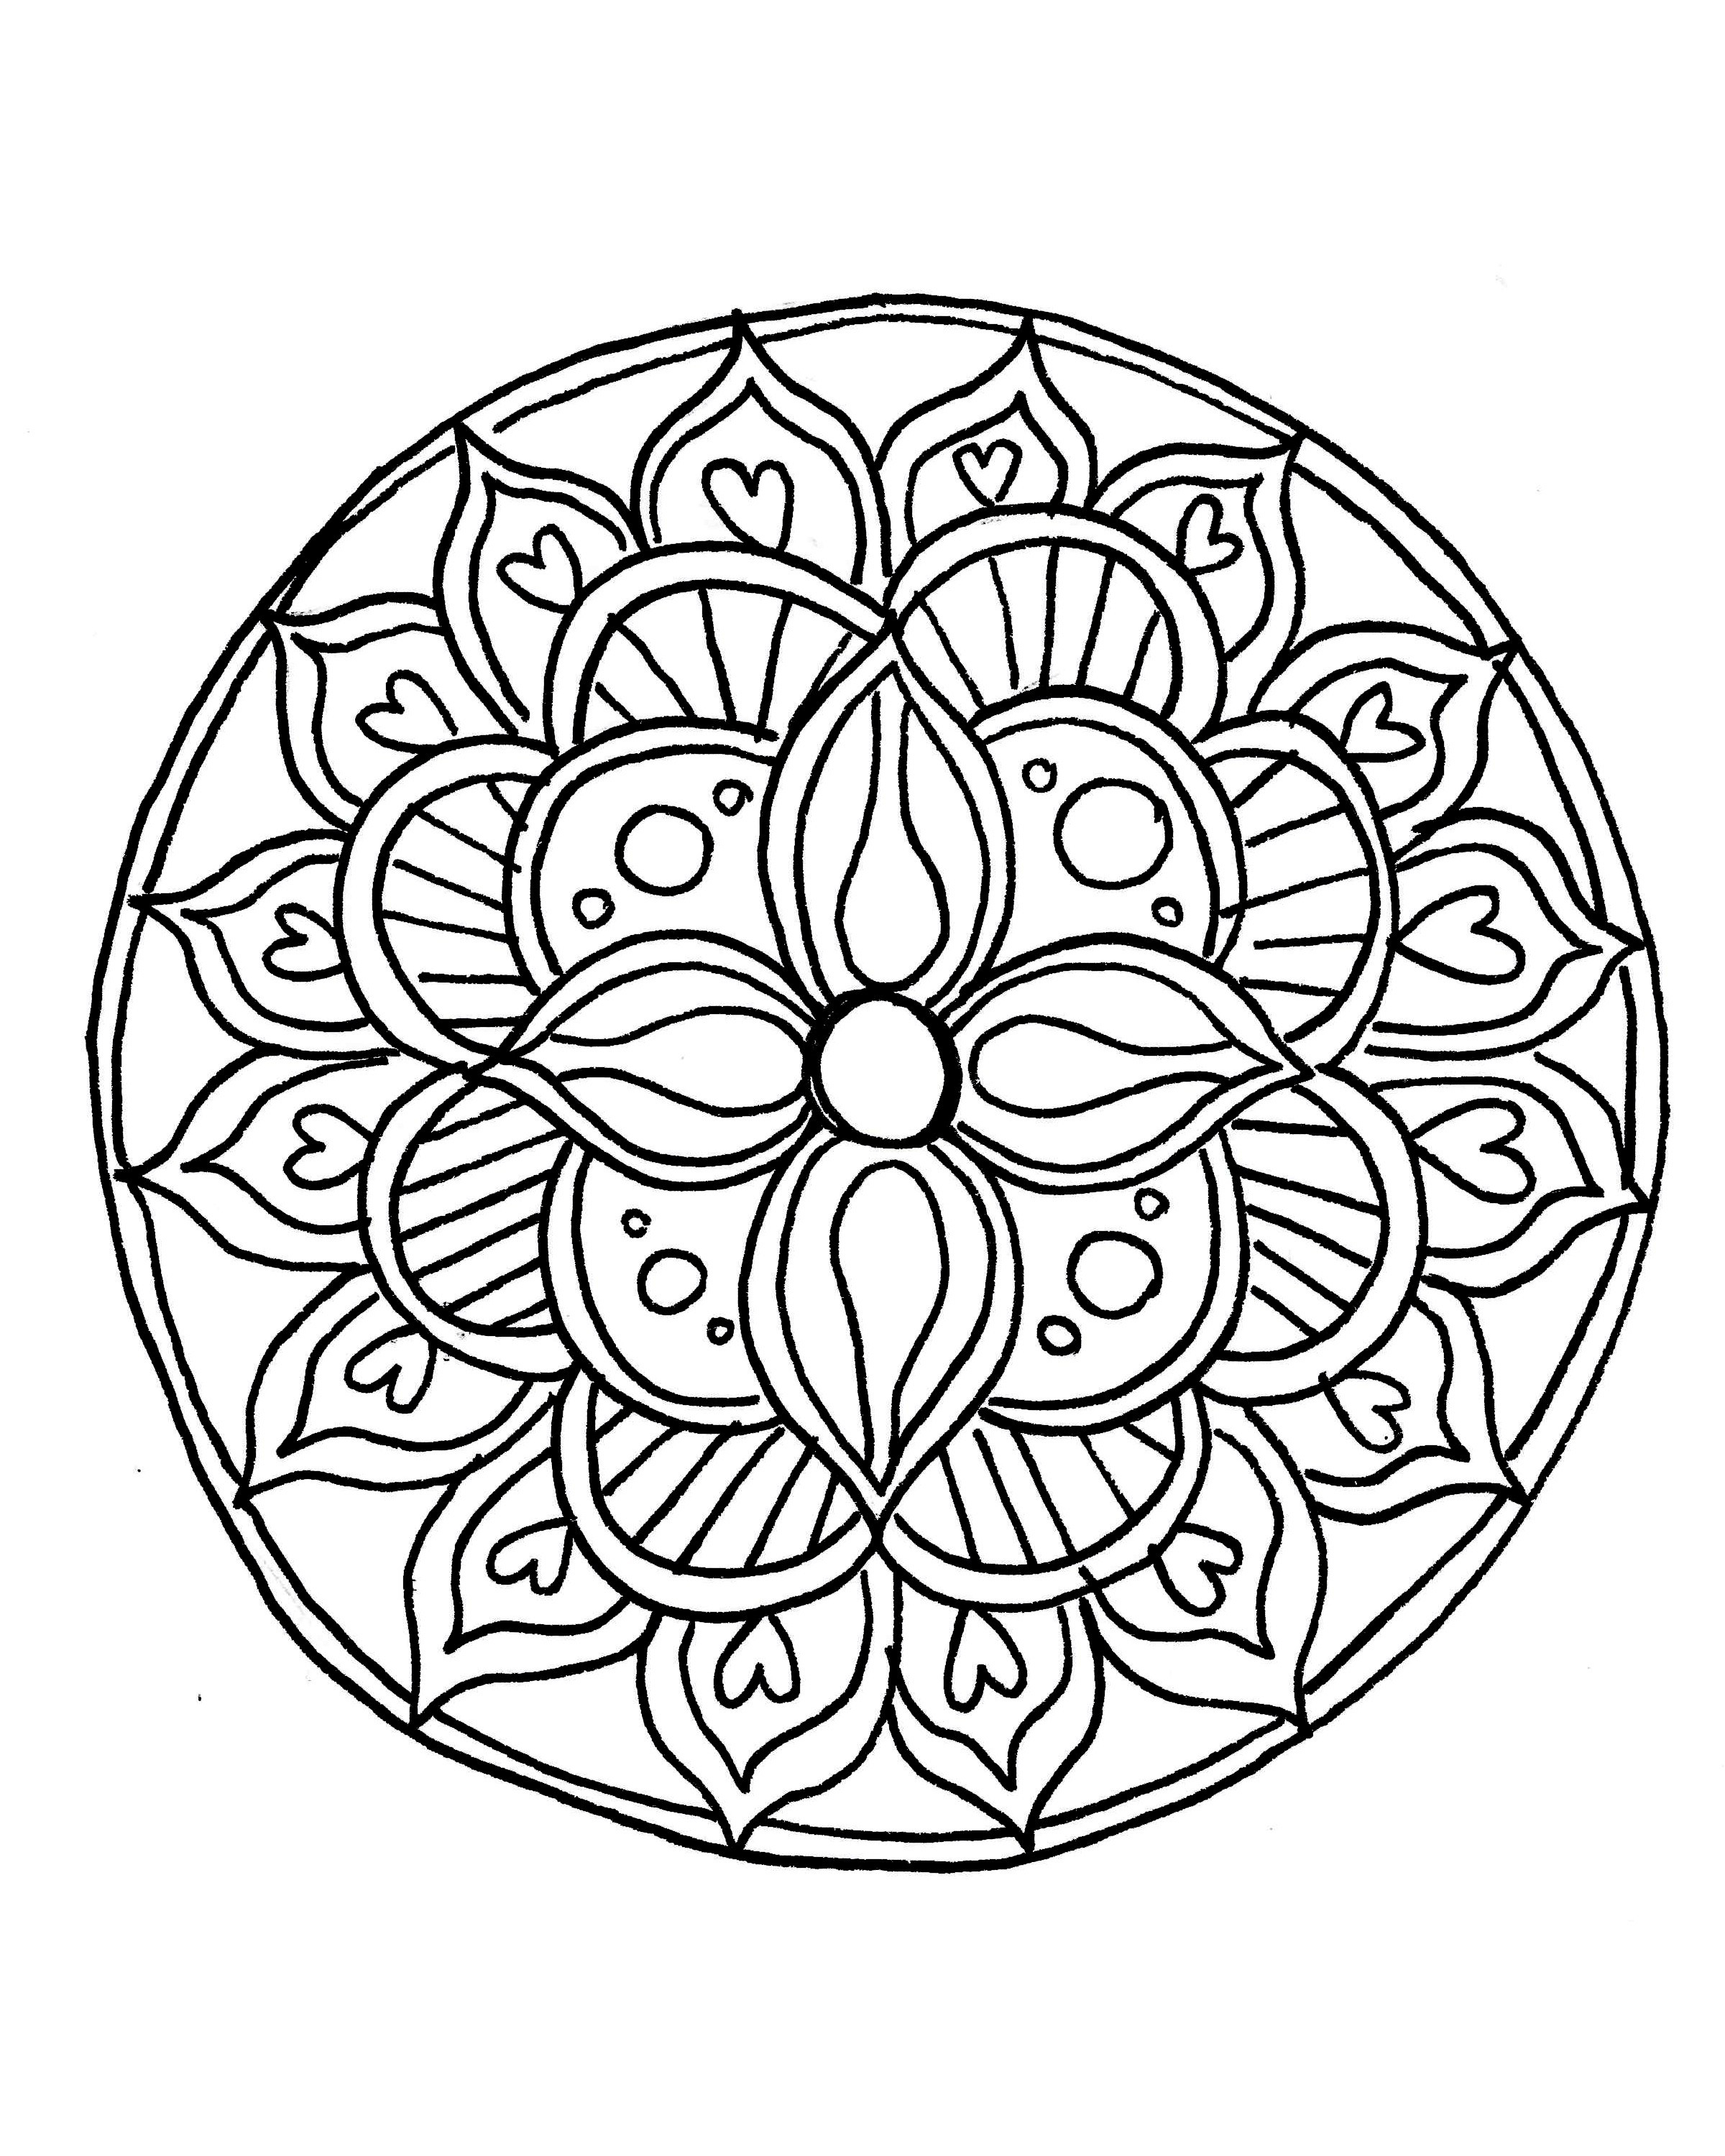 Free Printable Mandala Coloring Pages Adults Mandala Coloring Lovely Coloring Pages Coloring Pages Free For